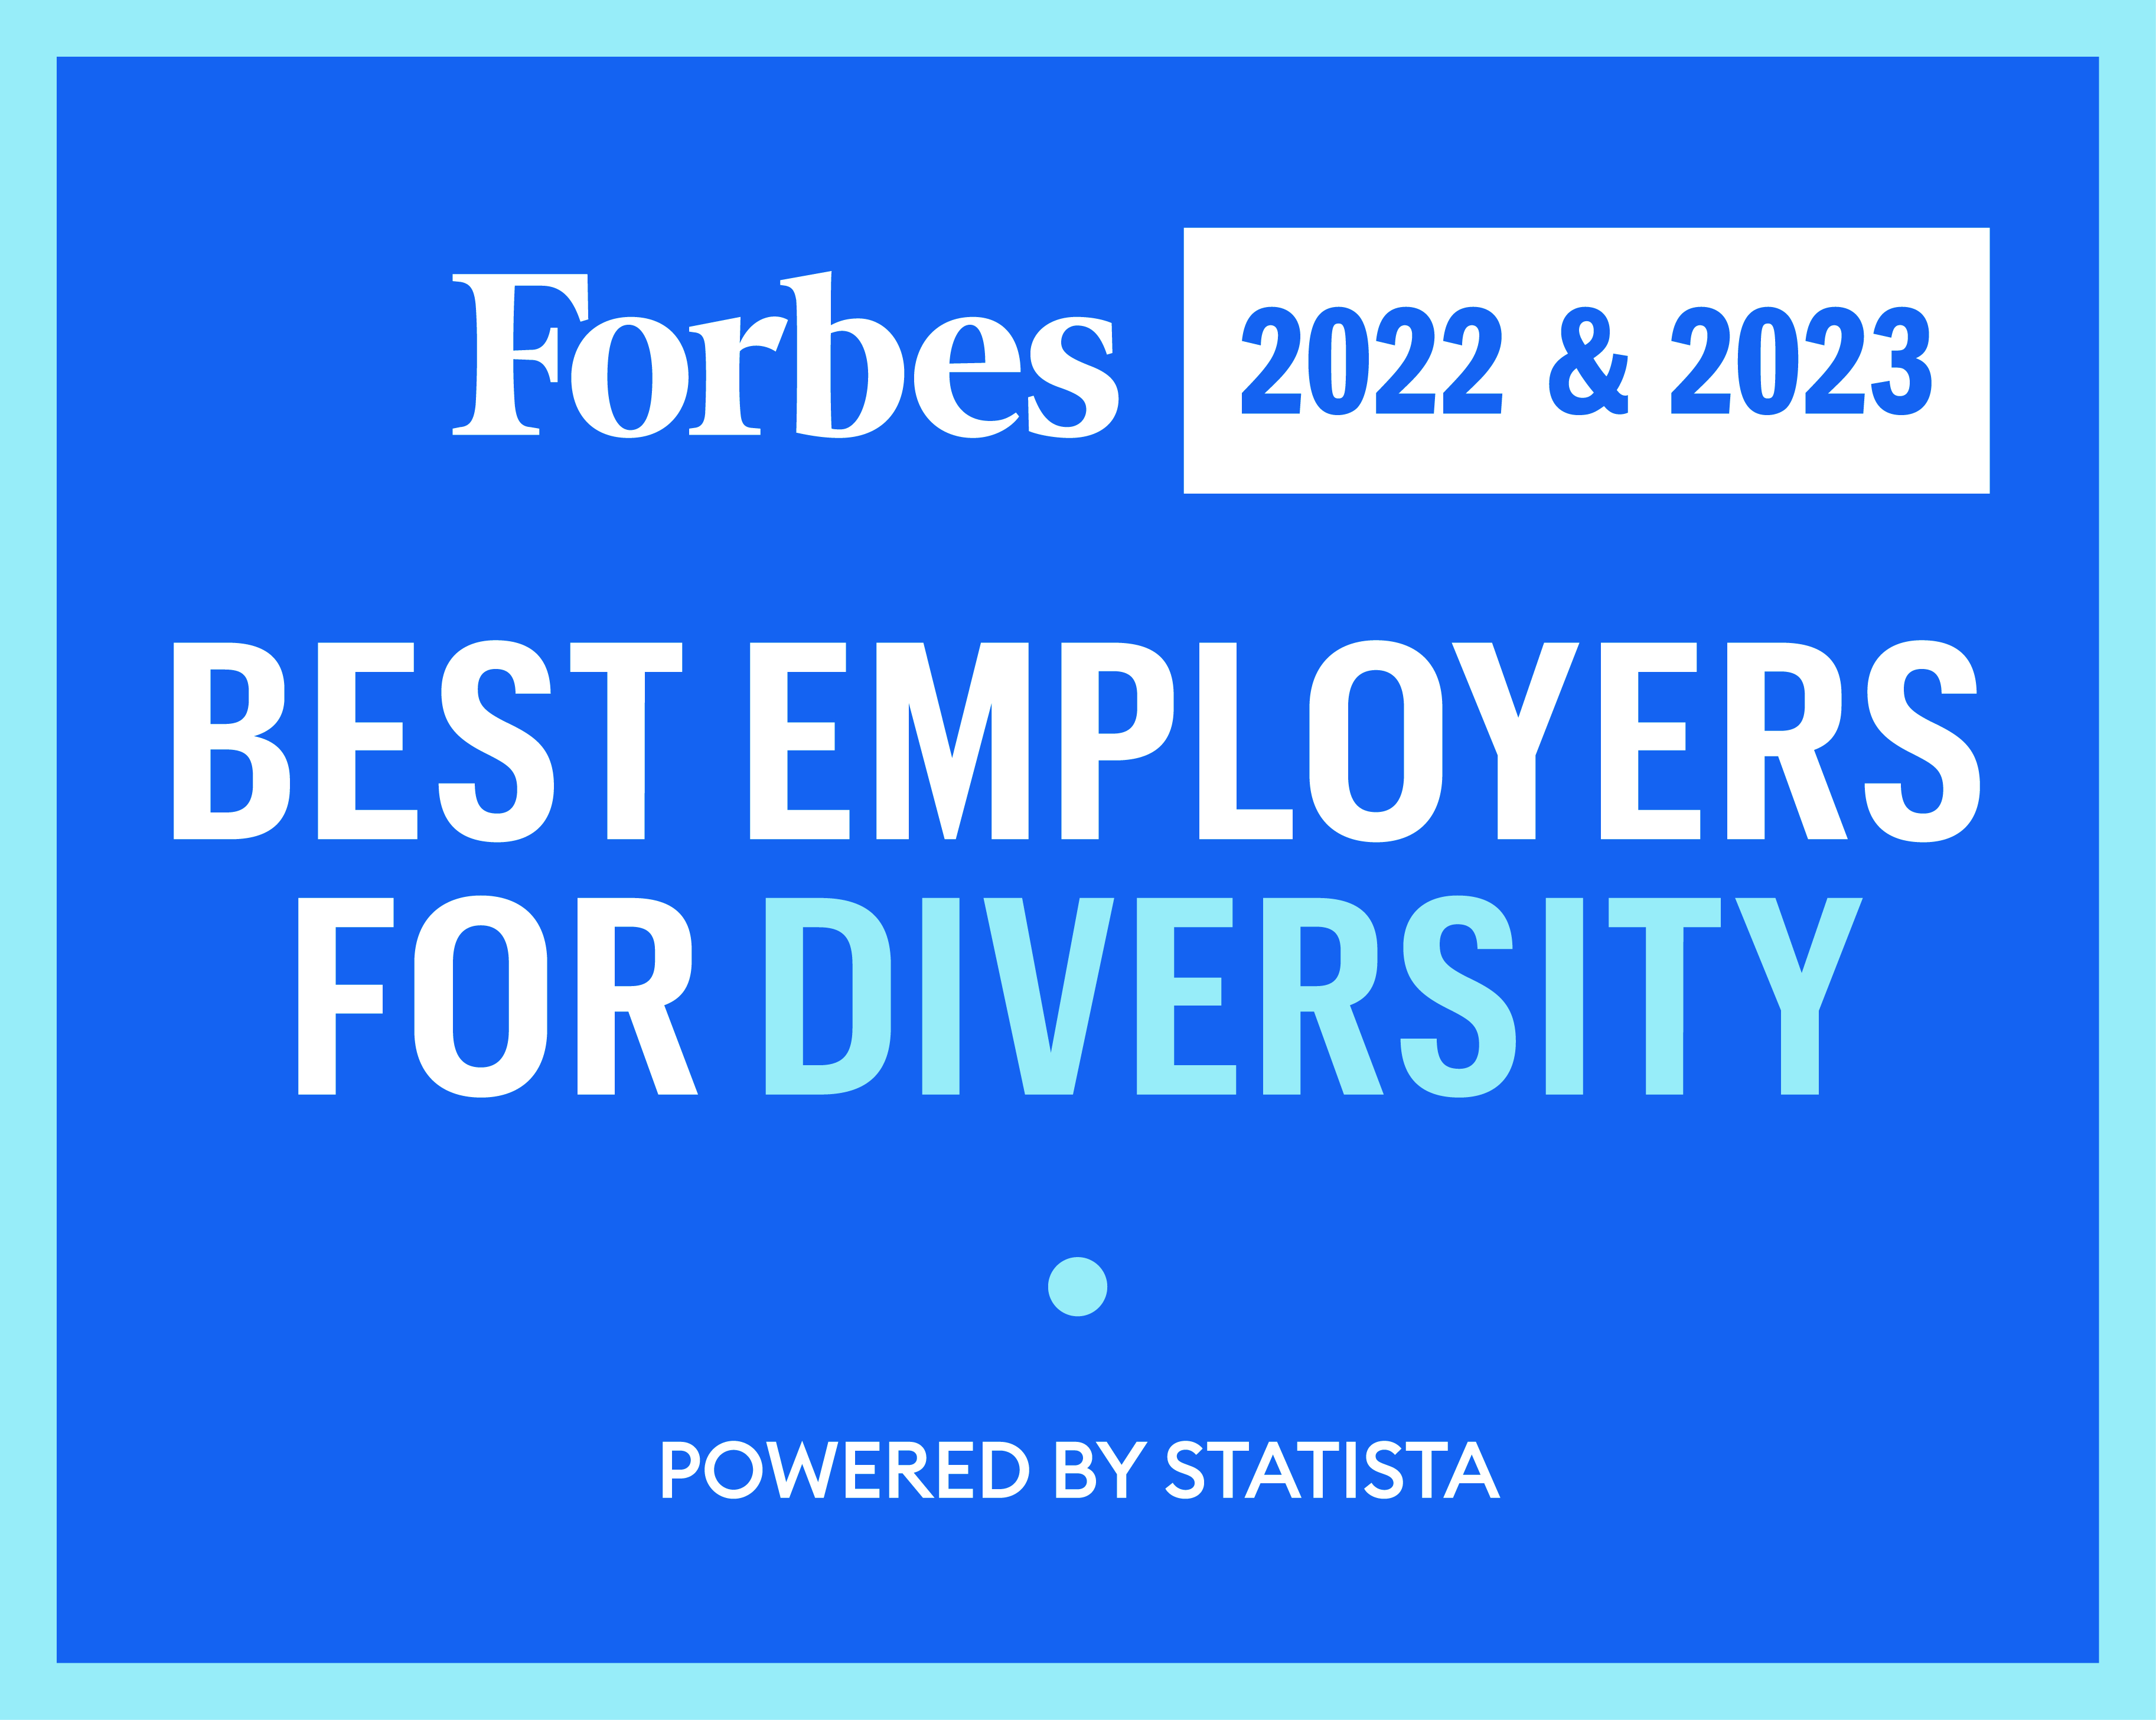 Forbes Best Employers for Diversity 2022 and 2023